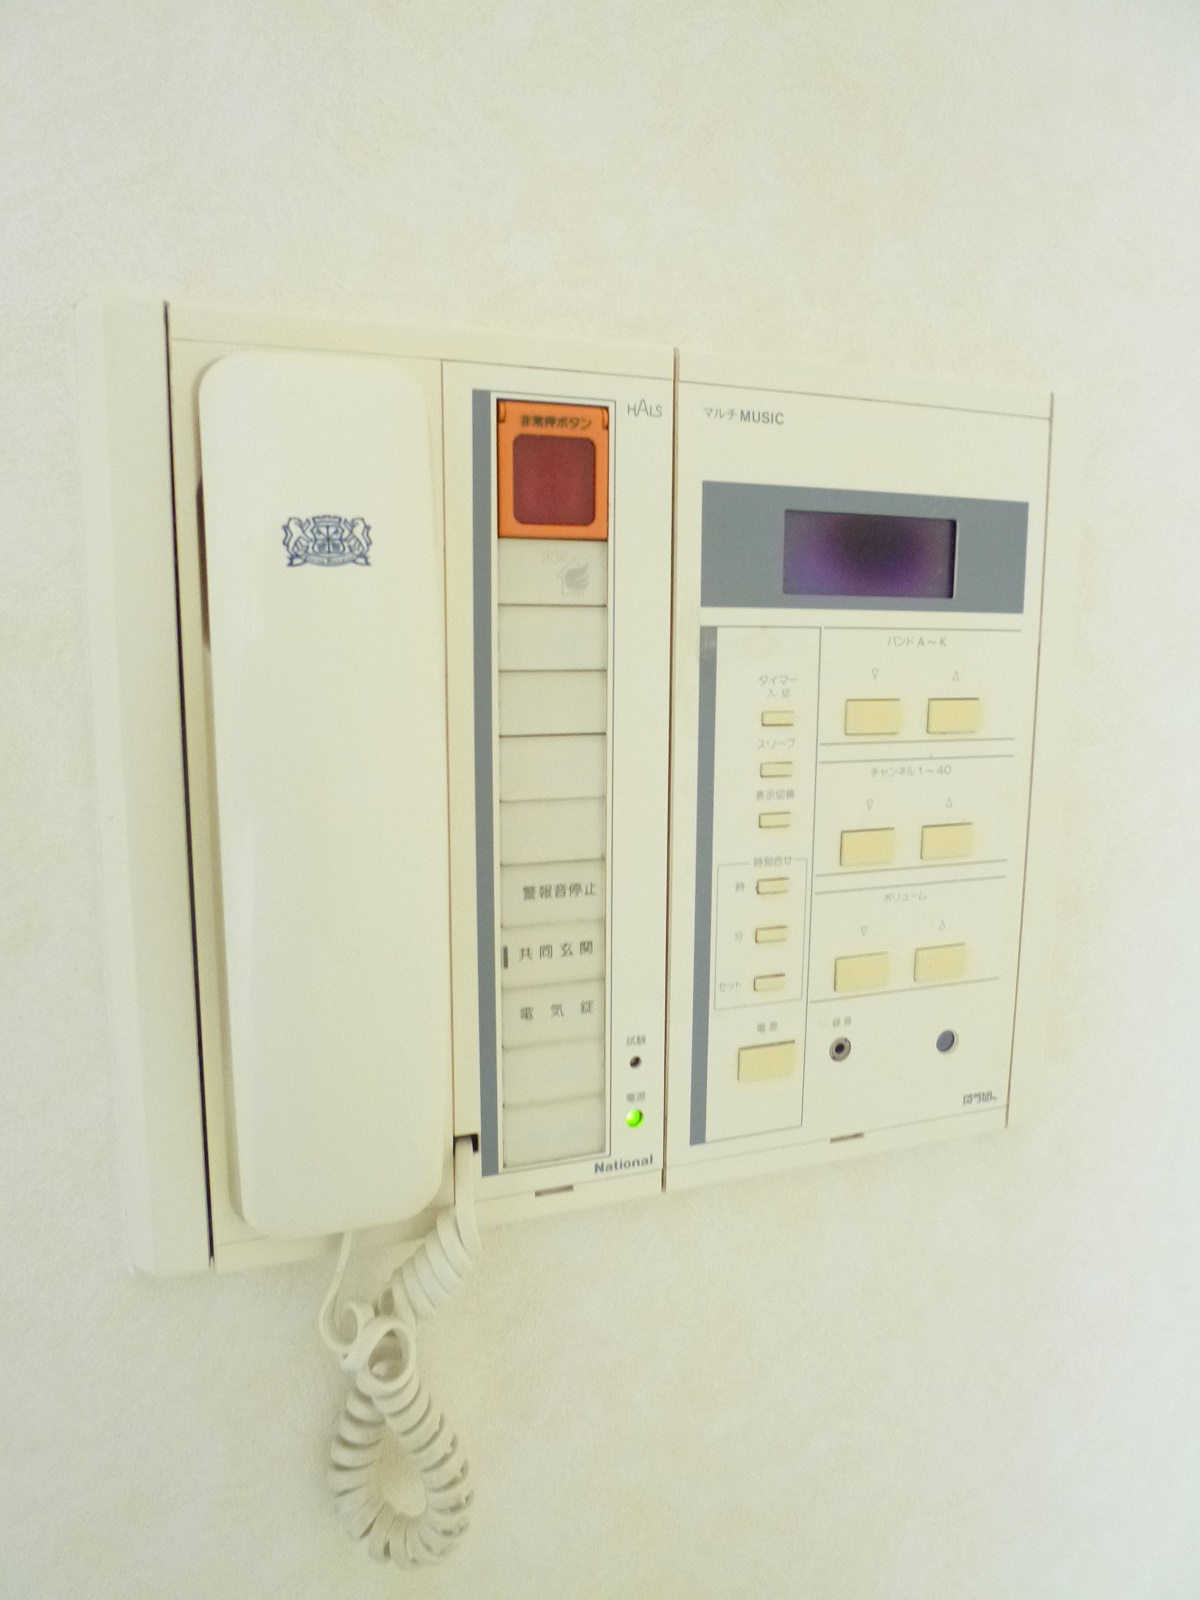 Other Equipment. Intercom and cable broadcasting operation panel